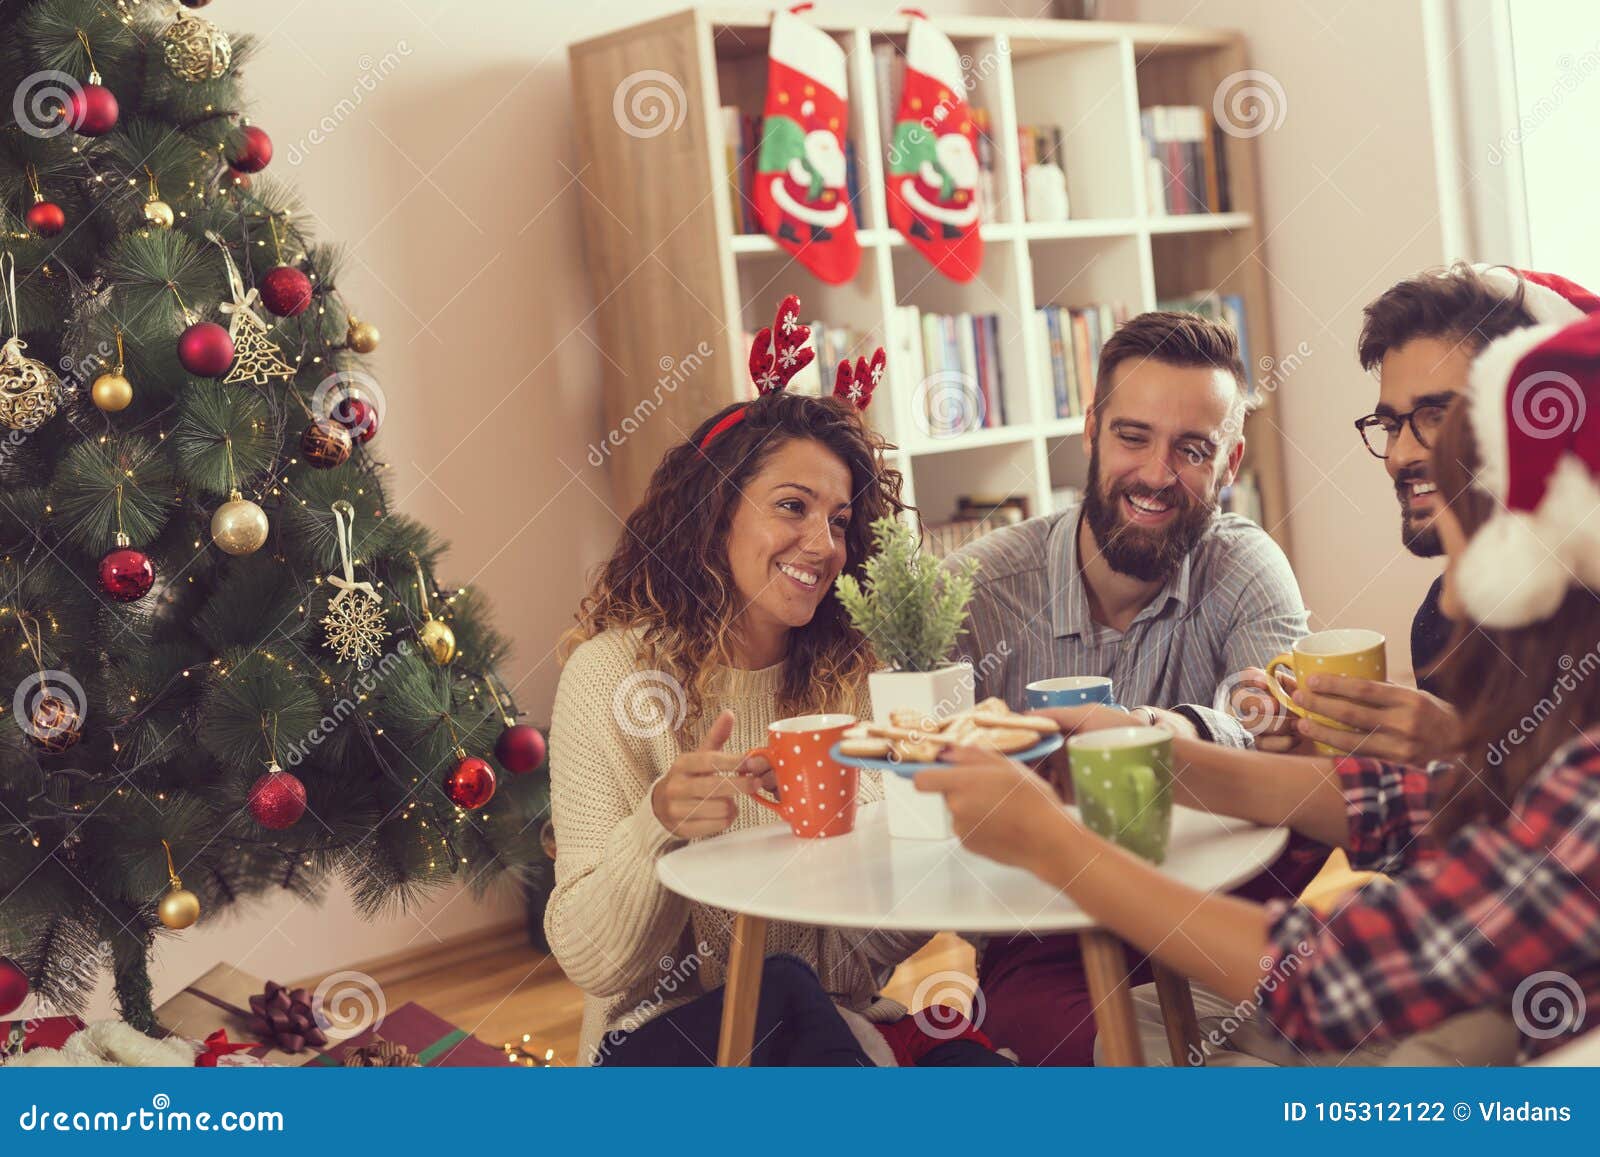 Download Friends Having Christmas Morning Coffee Stock Image of festive love